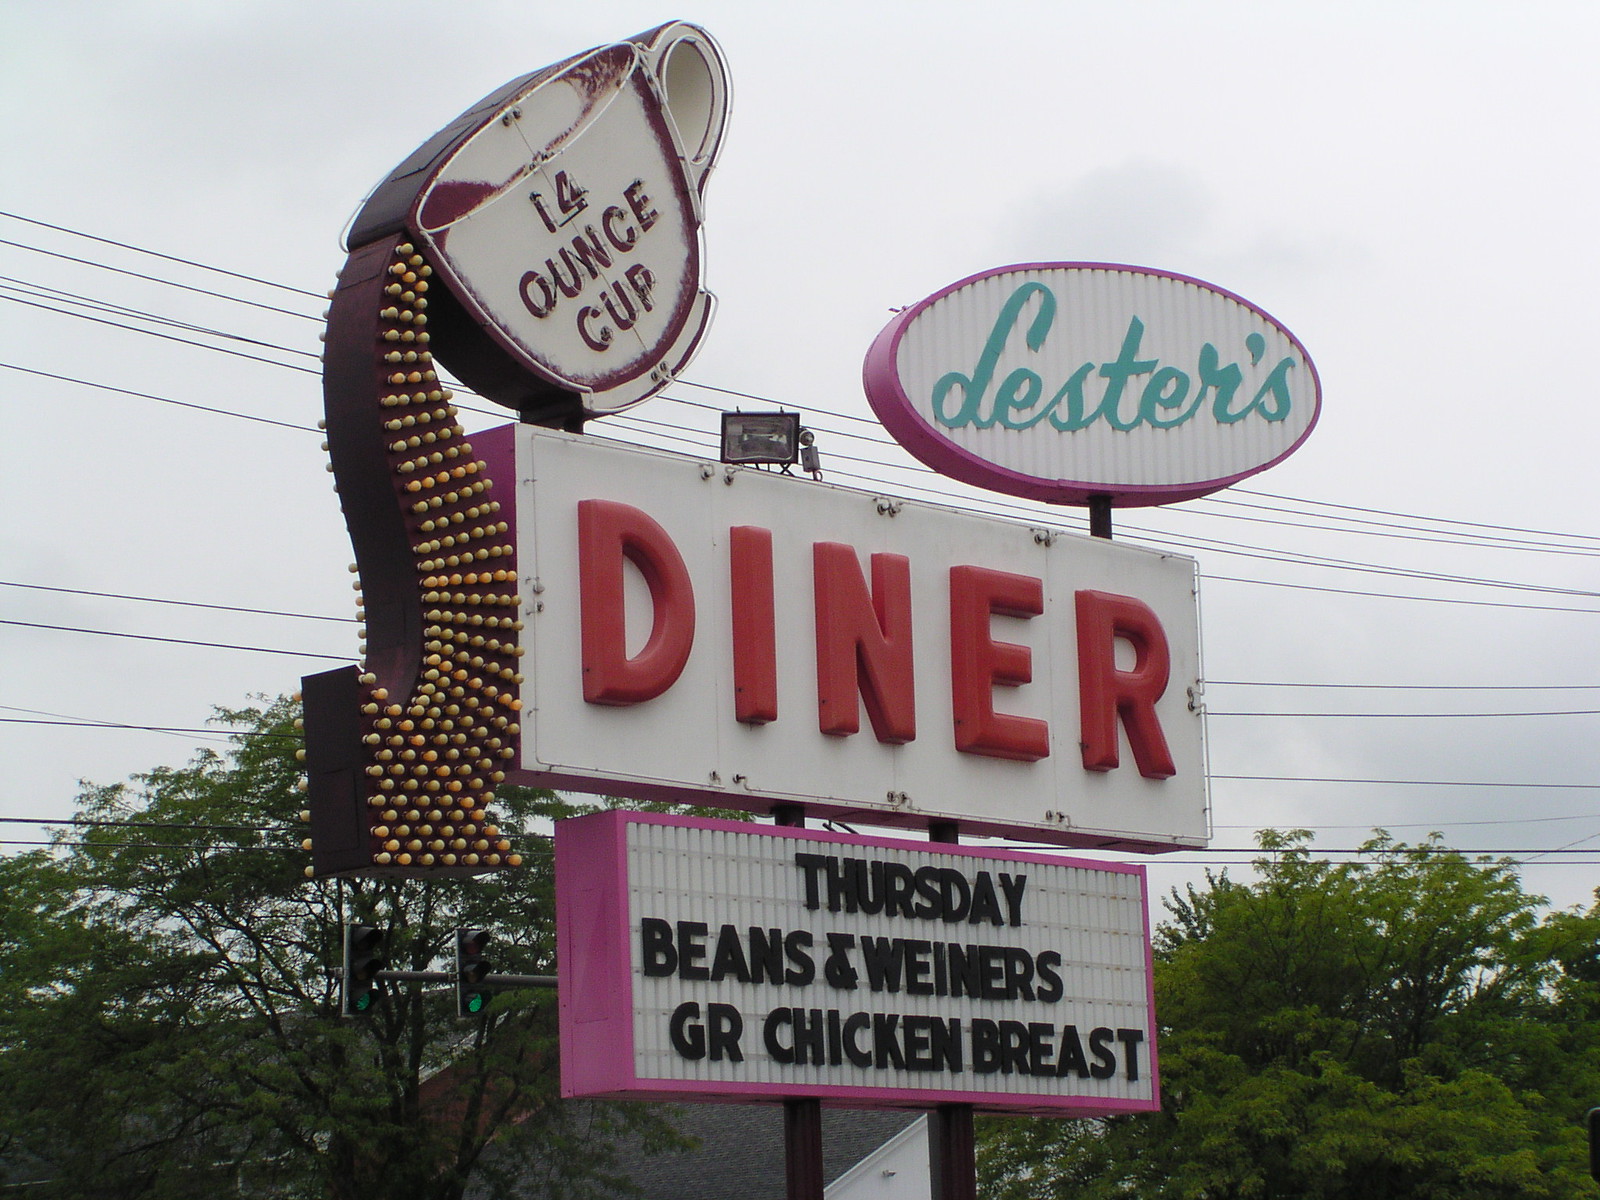 Lester's Diner - 233 South Main Street, Bryan, Ohio U.S.A. - July 14, 2005